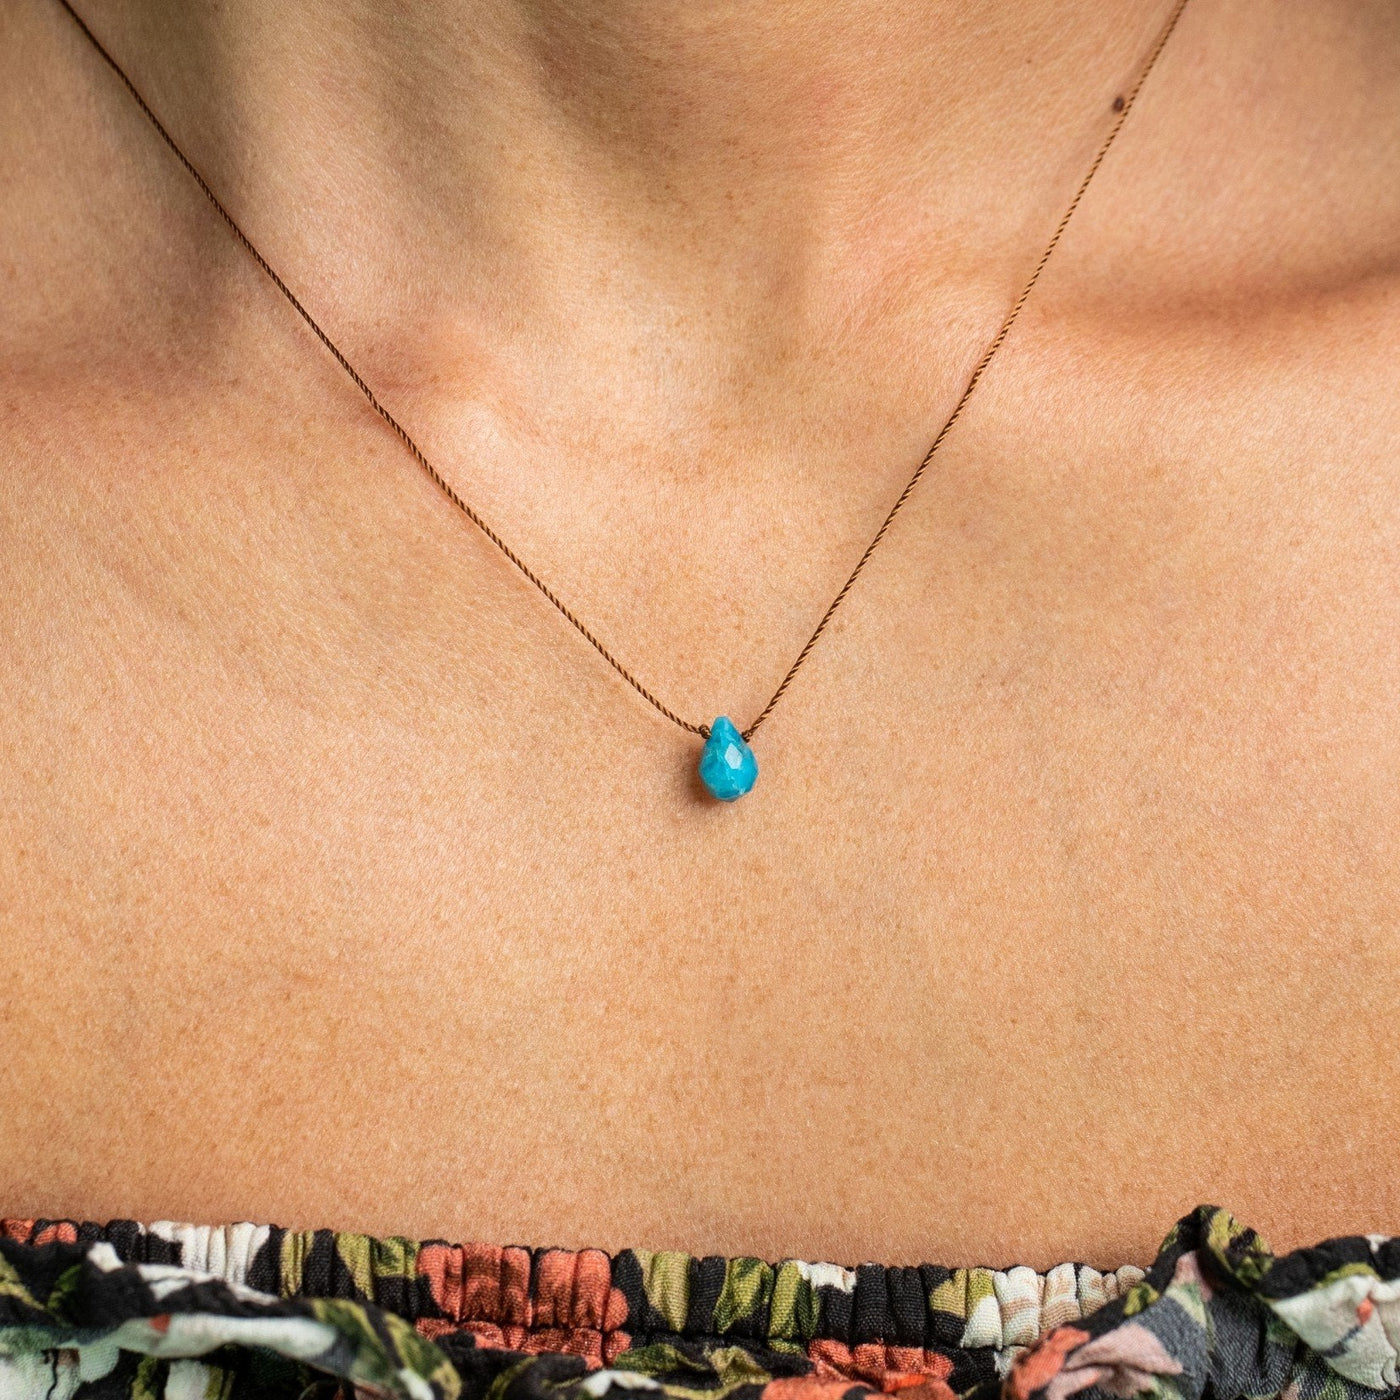 Magically Mindful Necklace - Apatite Necklace - Energy Muse